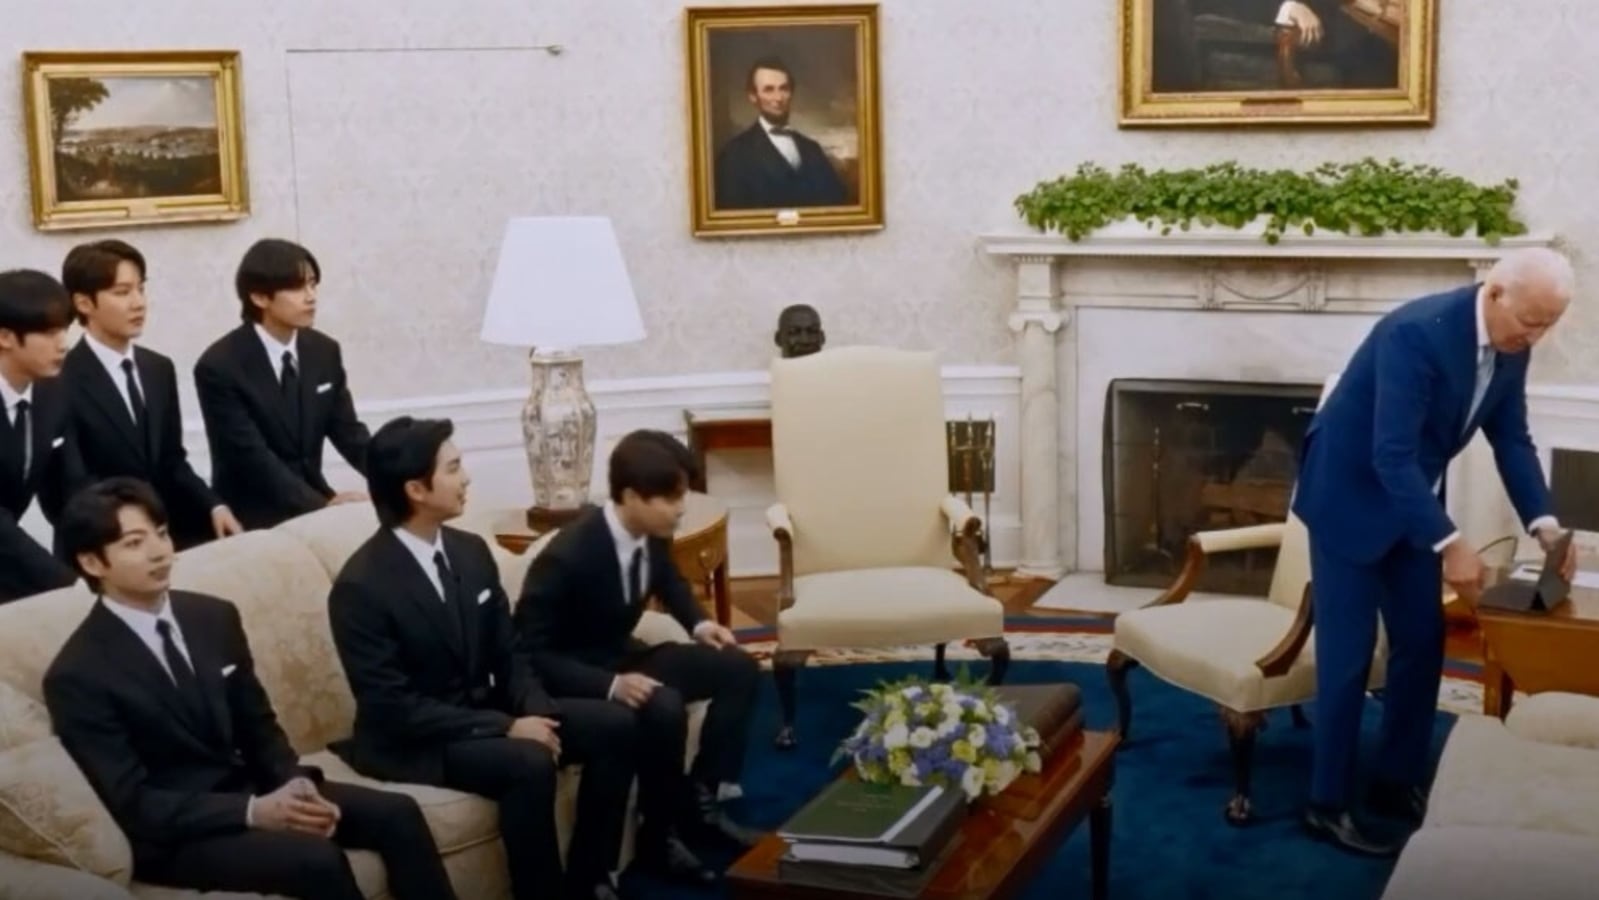 Joe Biden played Butter for BTS members to make them 'feel at home' during their White House visit. Watch